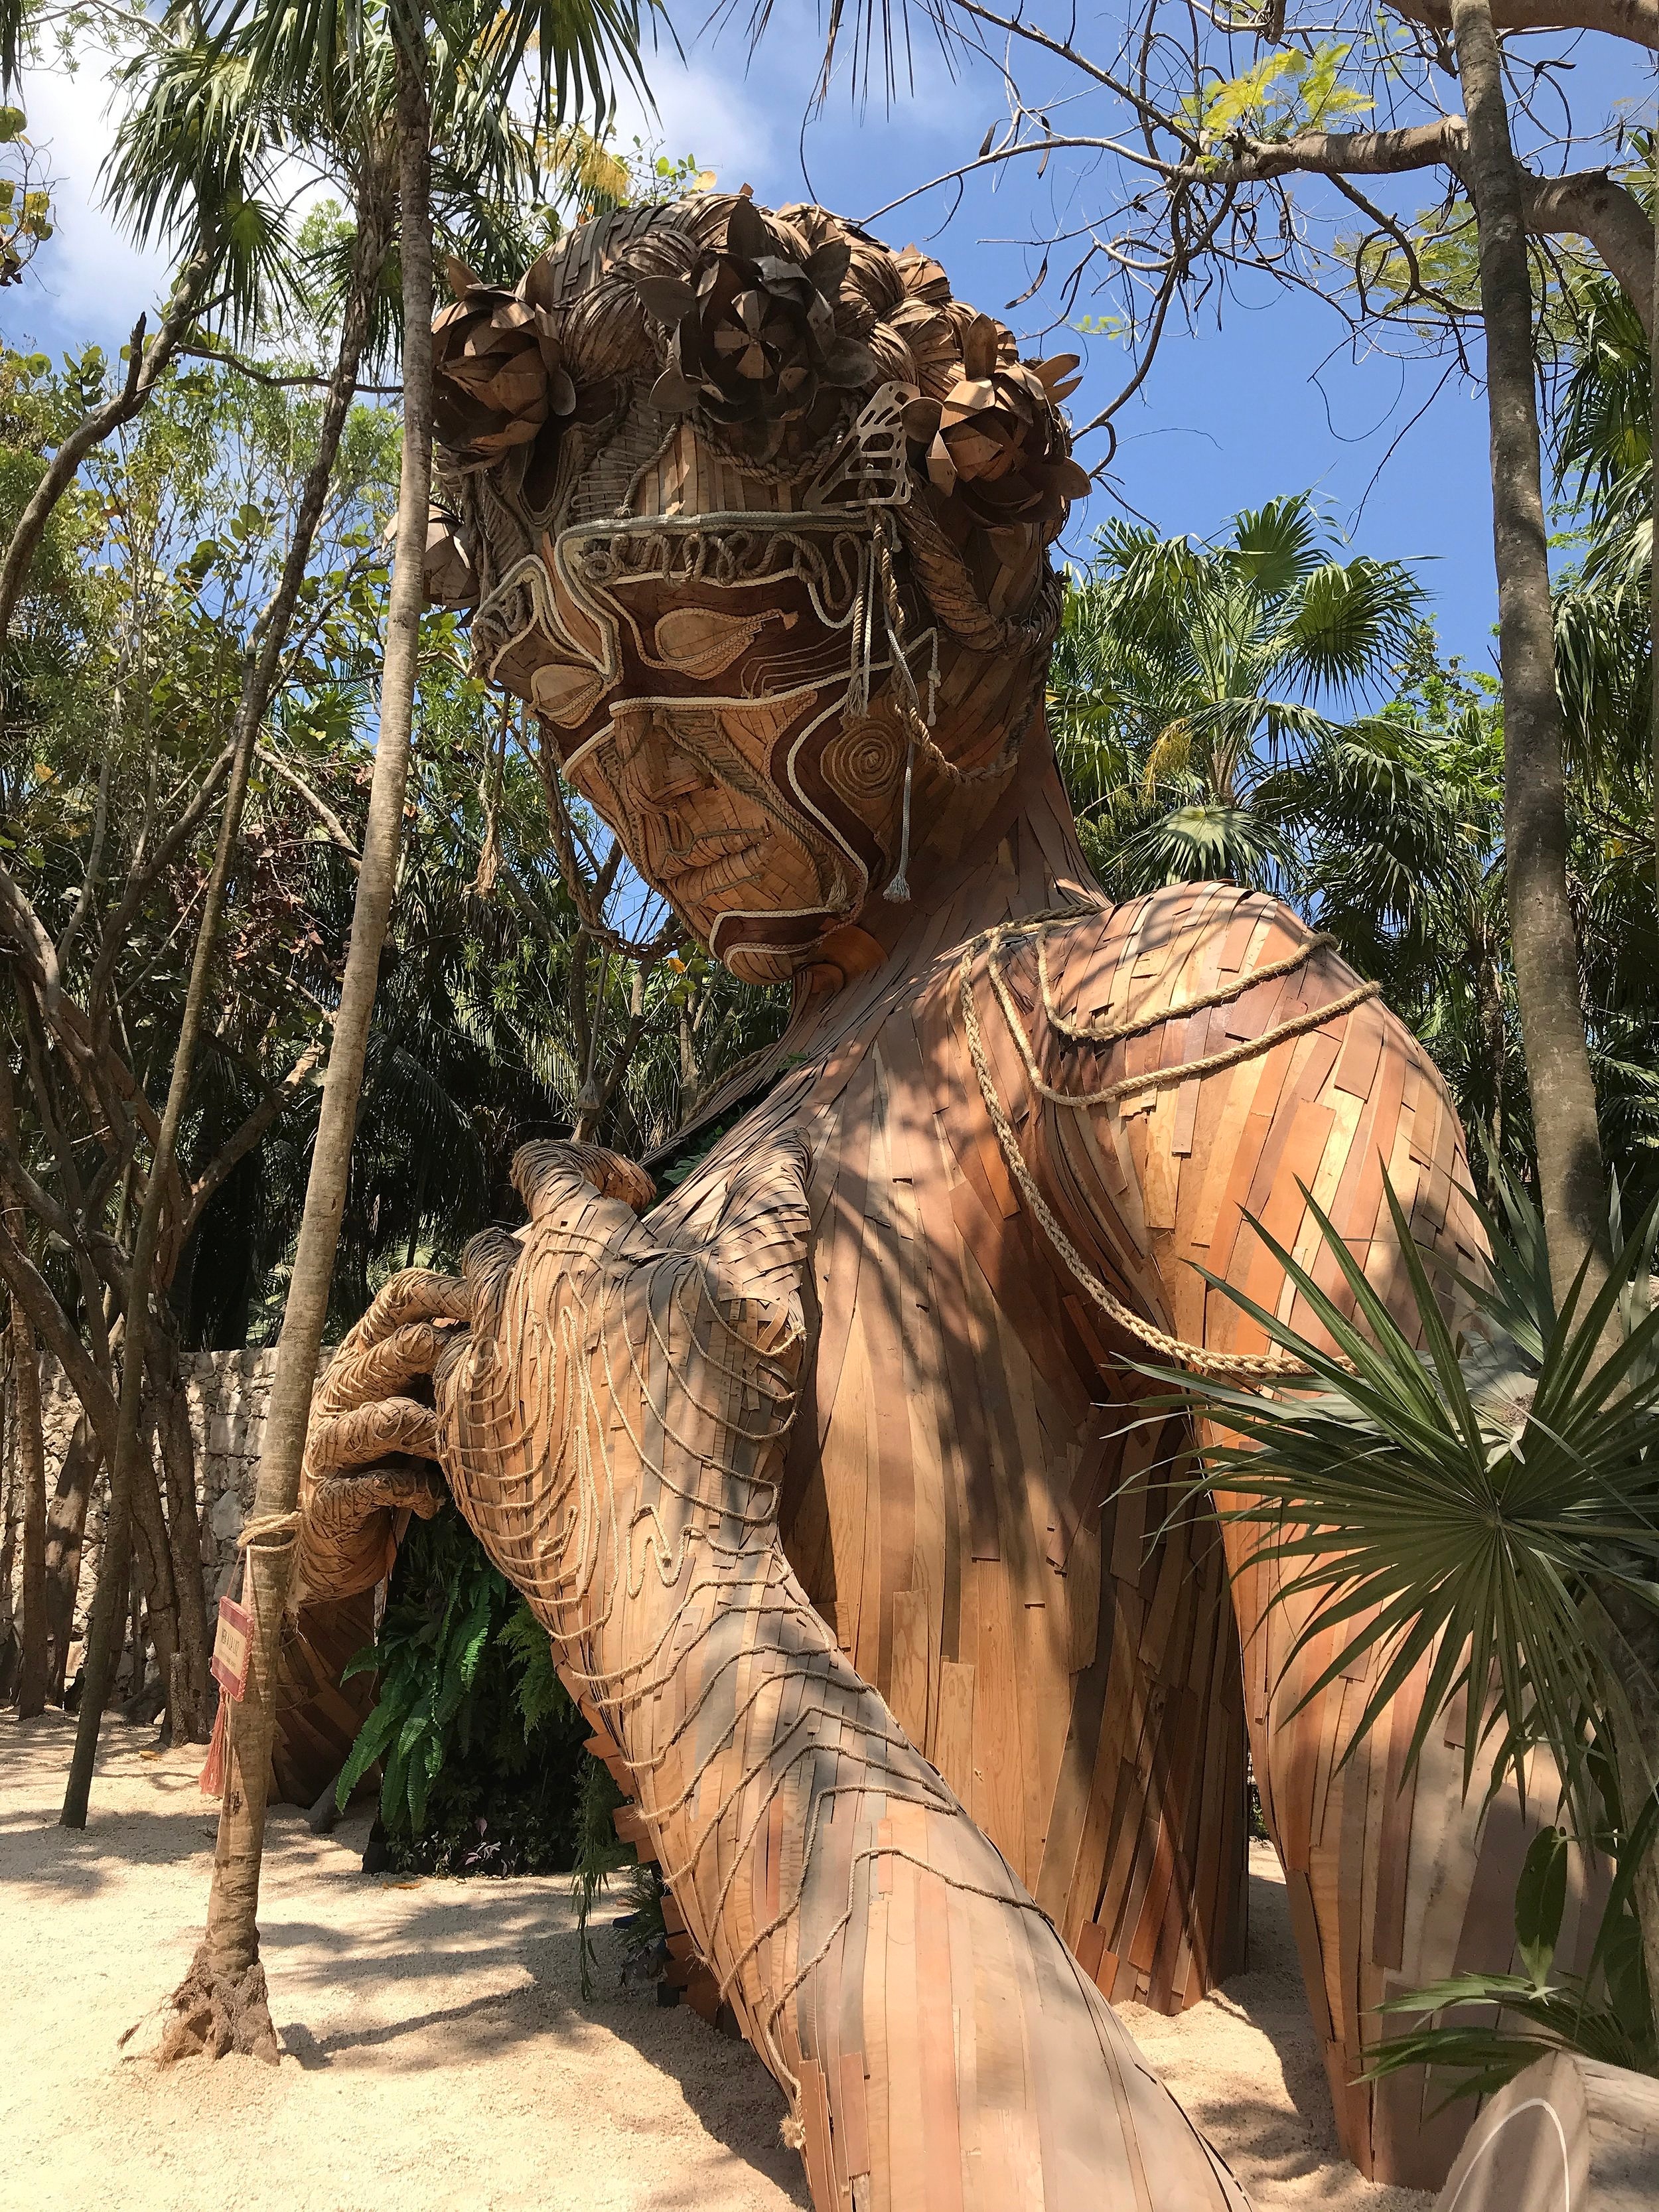 SoulD enjoy a whole week of live art, on the beach for Art With Me Festival. This festival was about helping bring ecological awareness and sustainability to Tulum and the whole planet. 